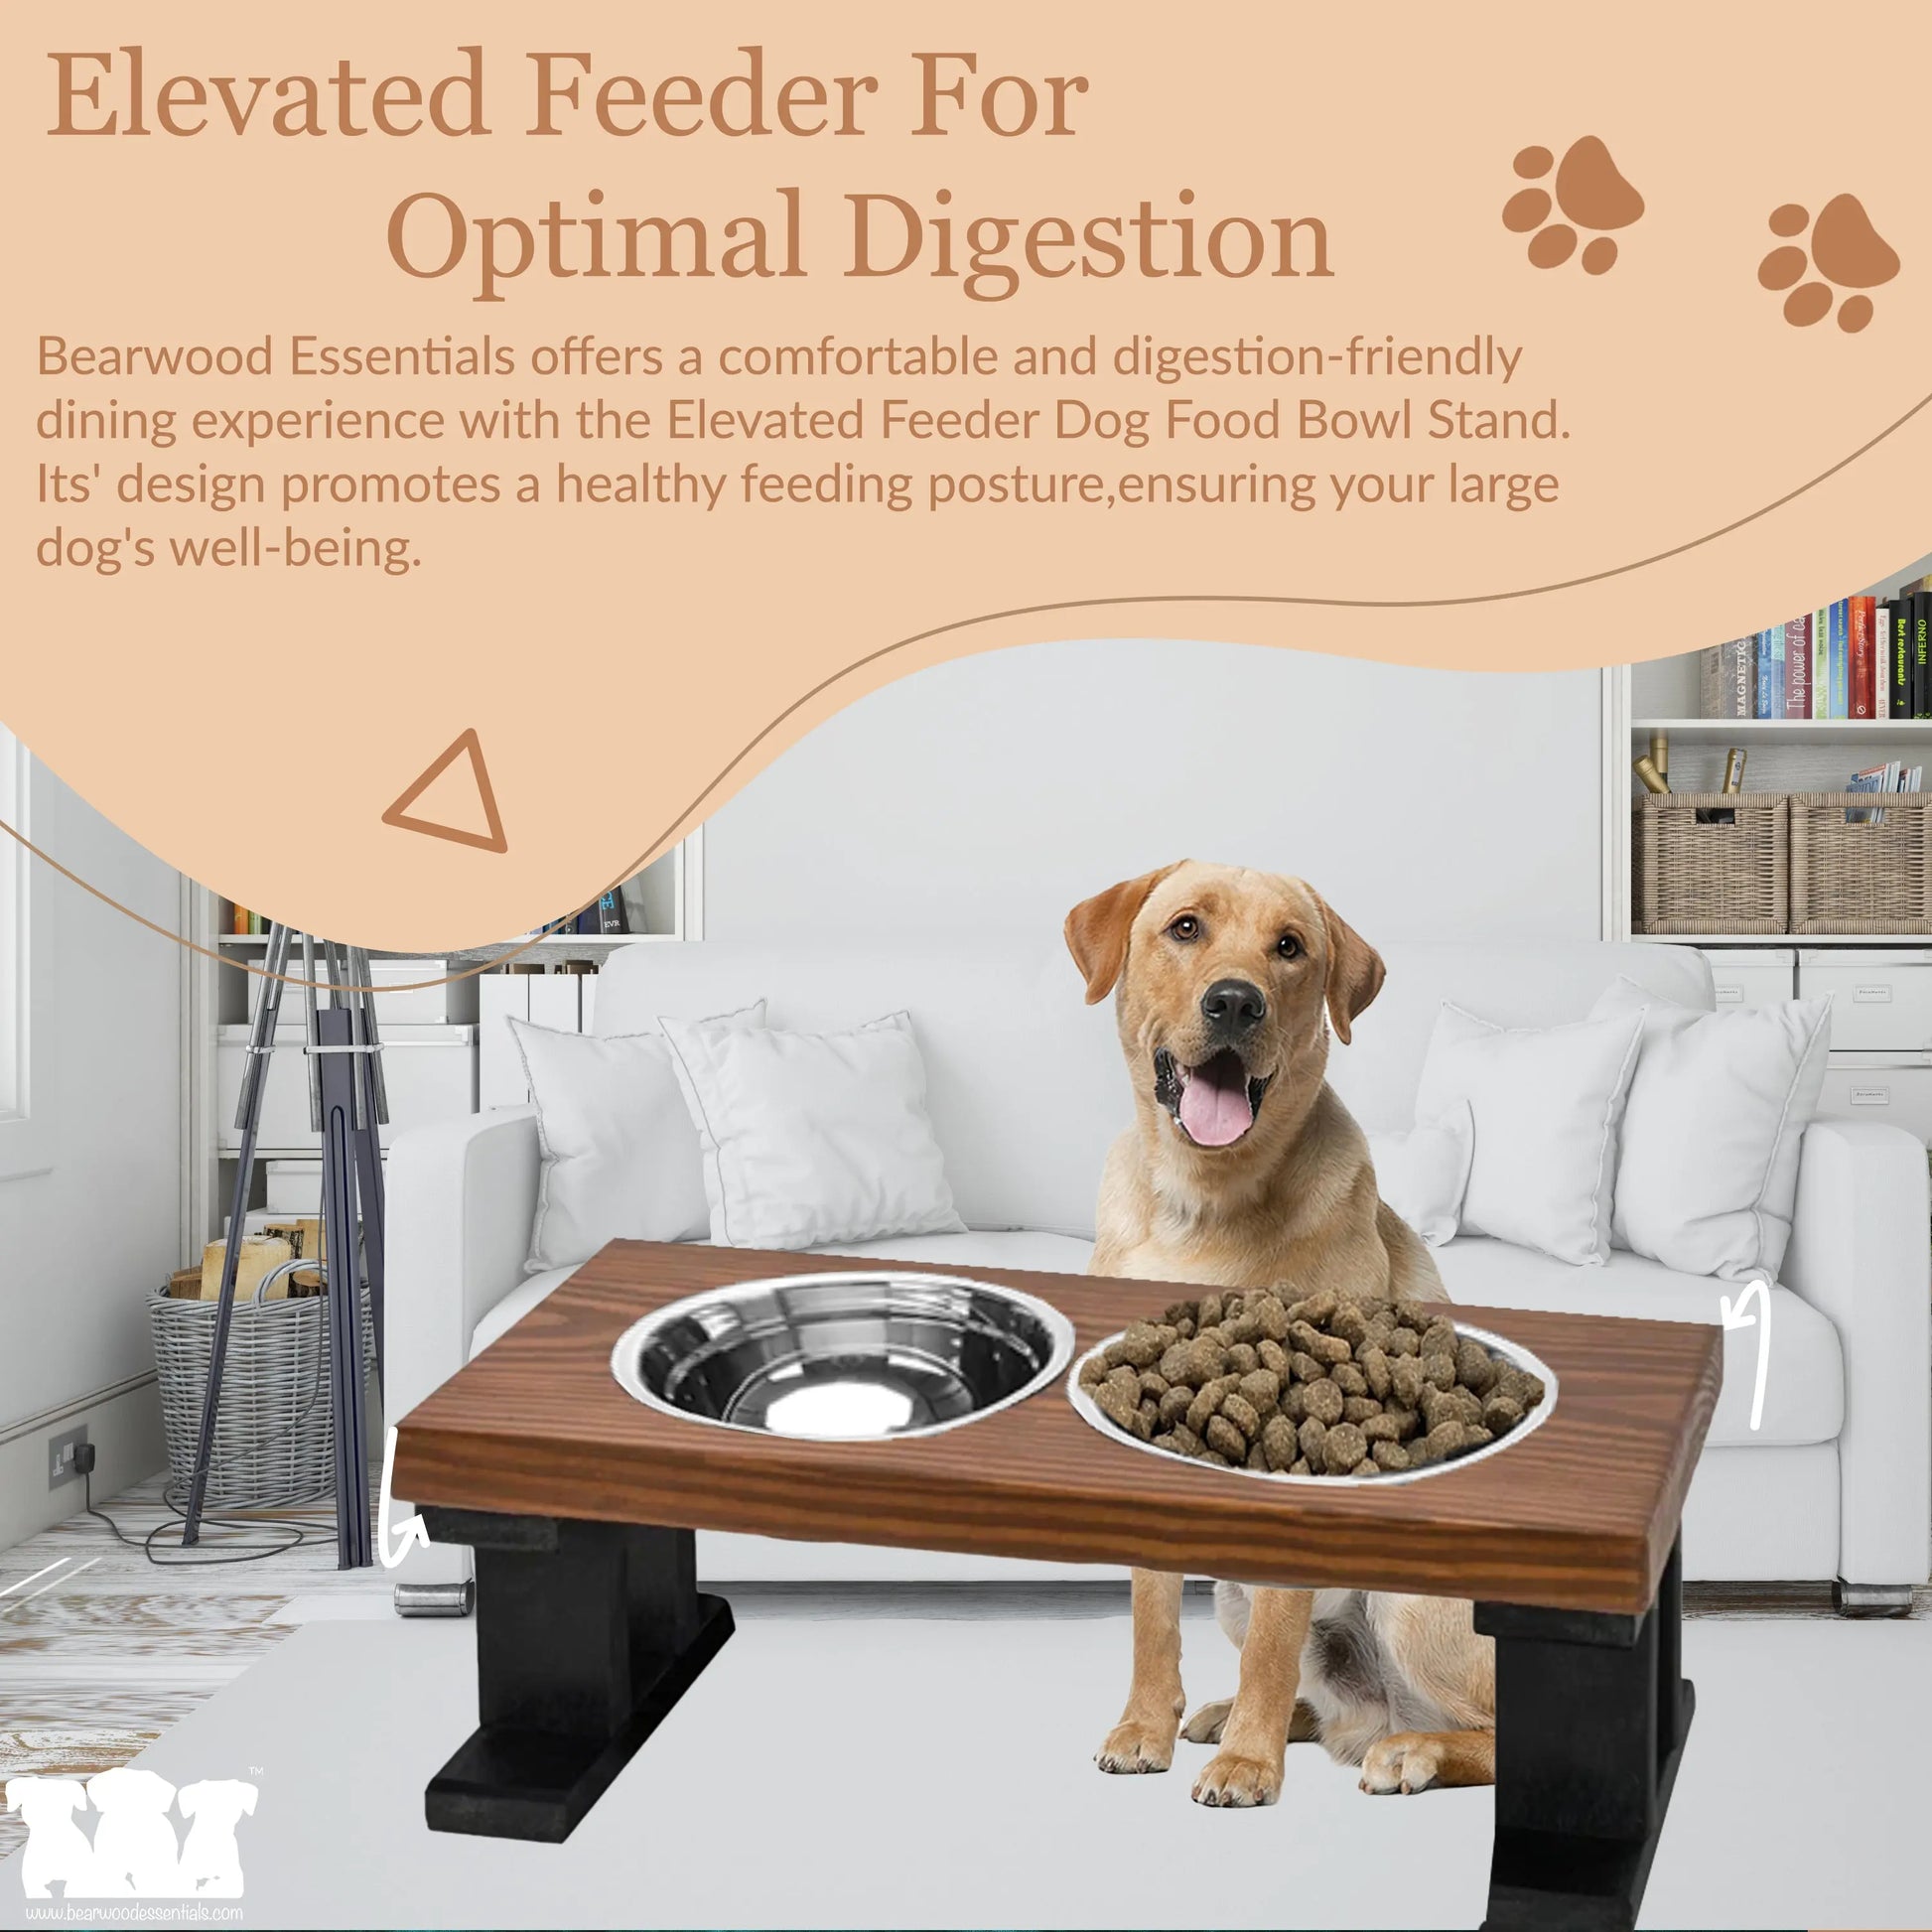 Large 12 Tall Elevated Dog & Pet Feeder- Double Bowl Raised Food & Water Stand- Includes 2 Extra Stainless Steel Bowls, 4 Bowls Total